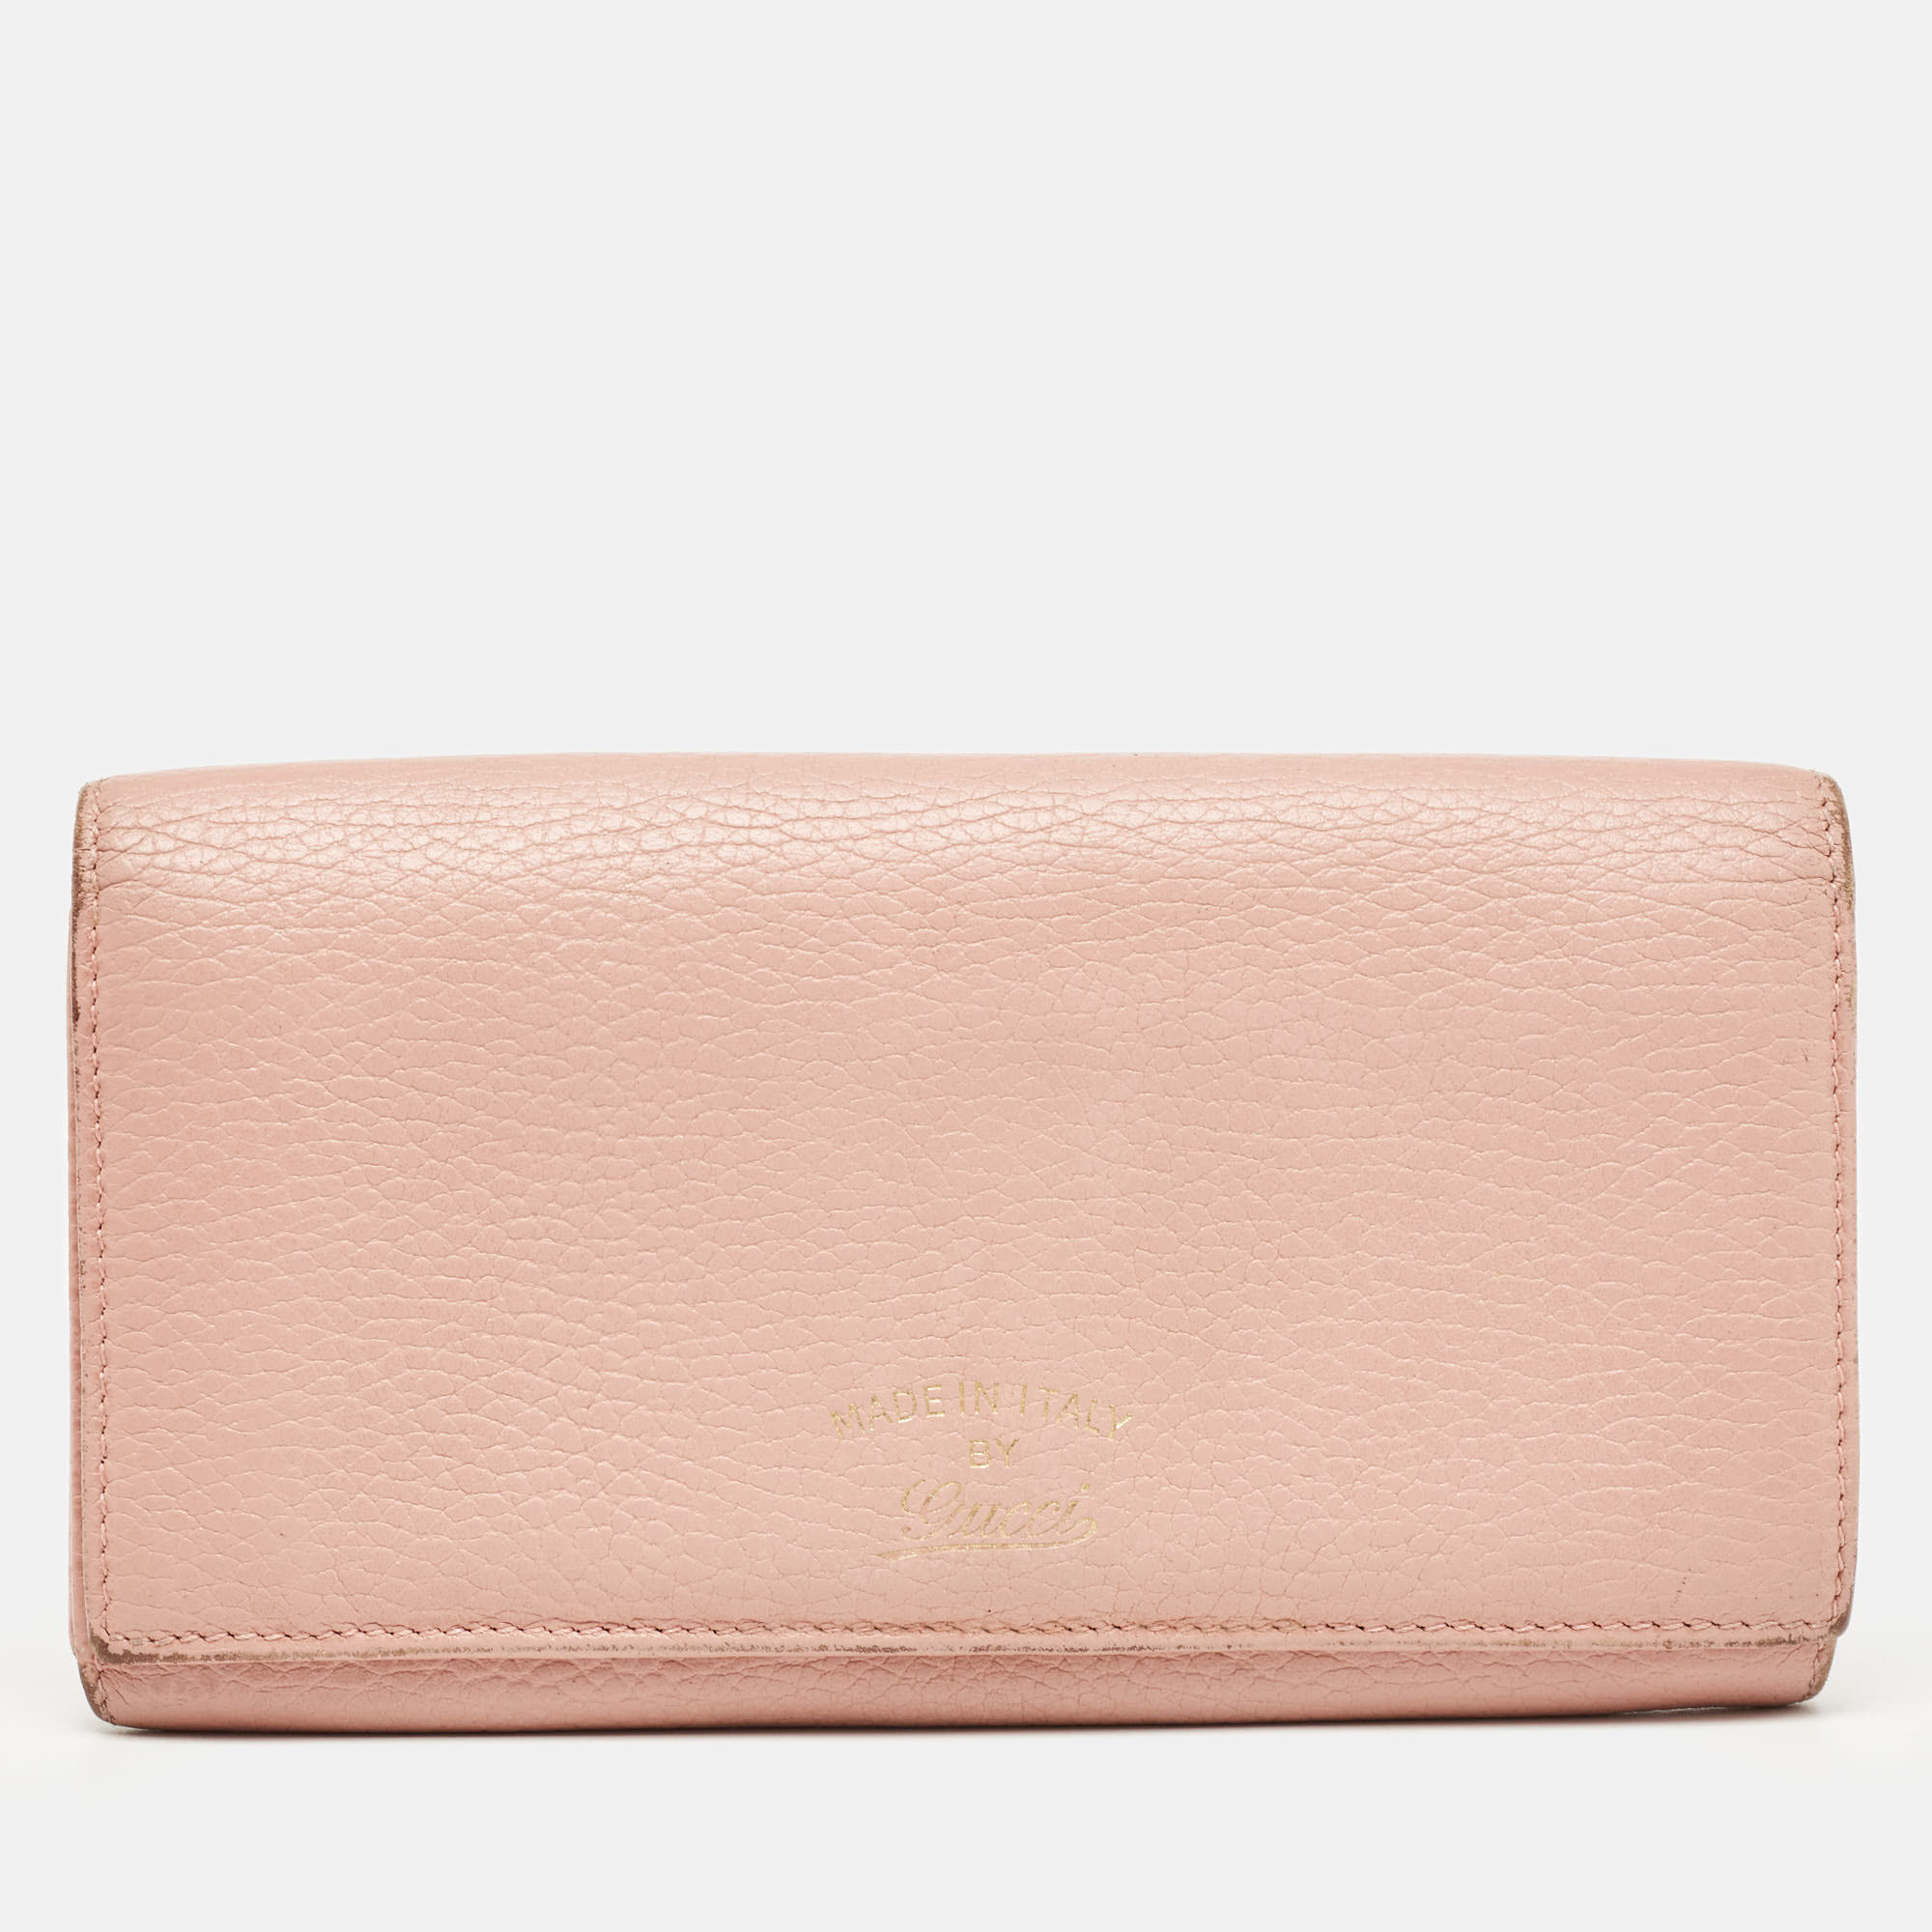 Gucci  old rose leather swing continental wallet